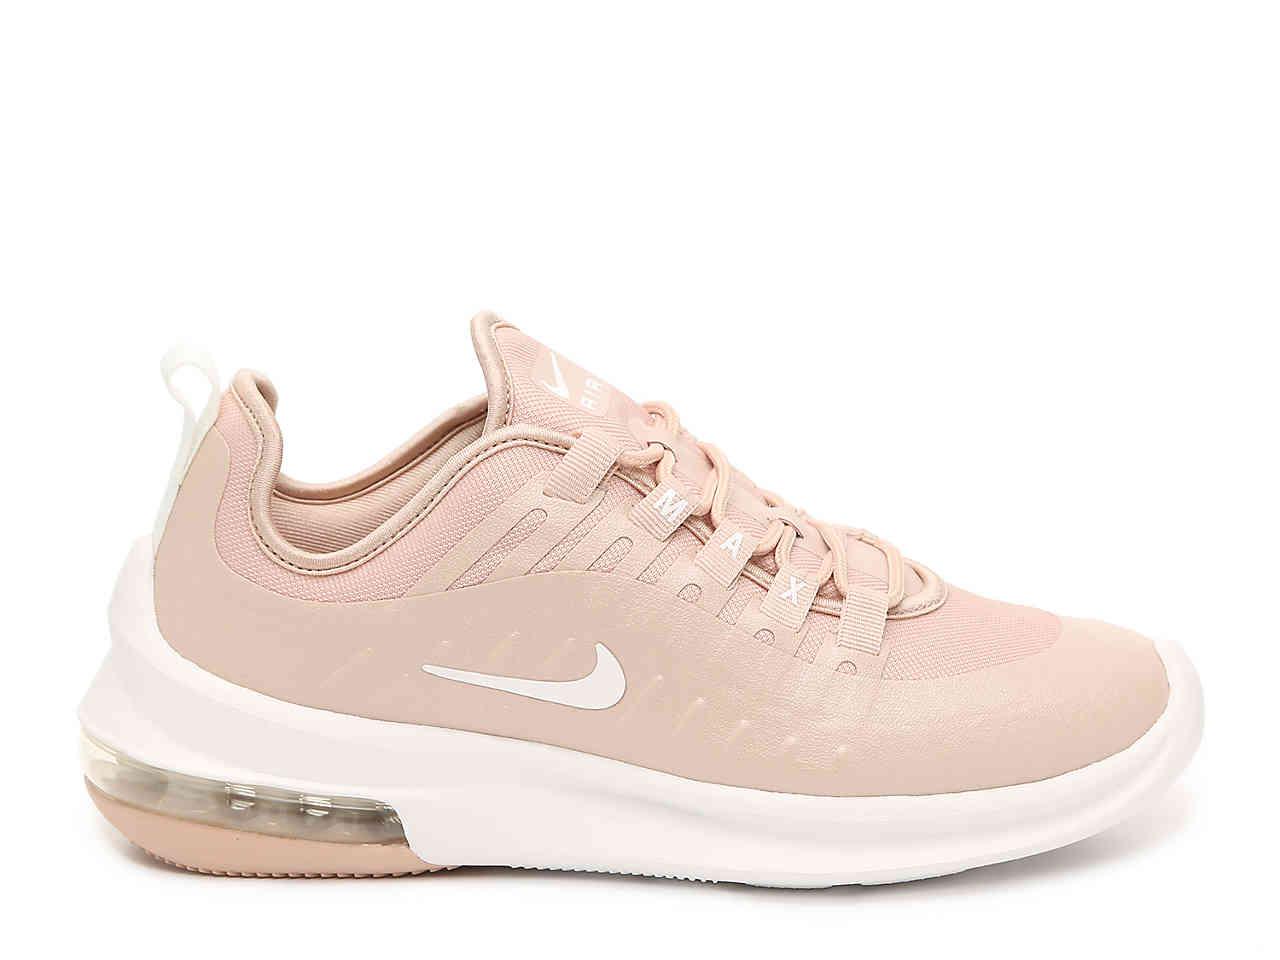 Nike Synthetic Air Max Axis Sneaker in Light Pink (Pink) - Lyst